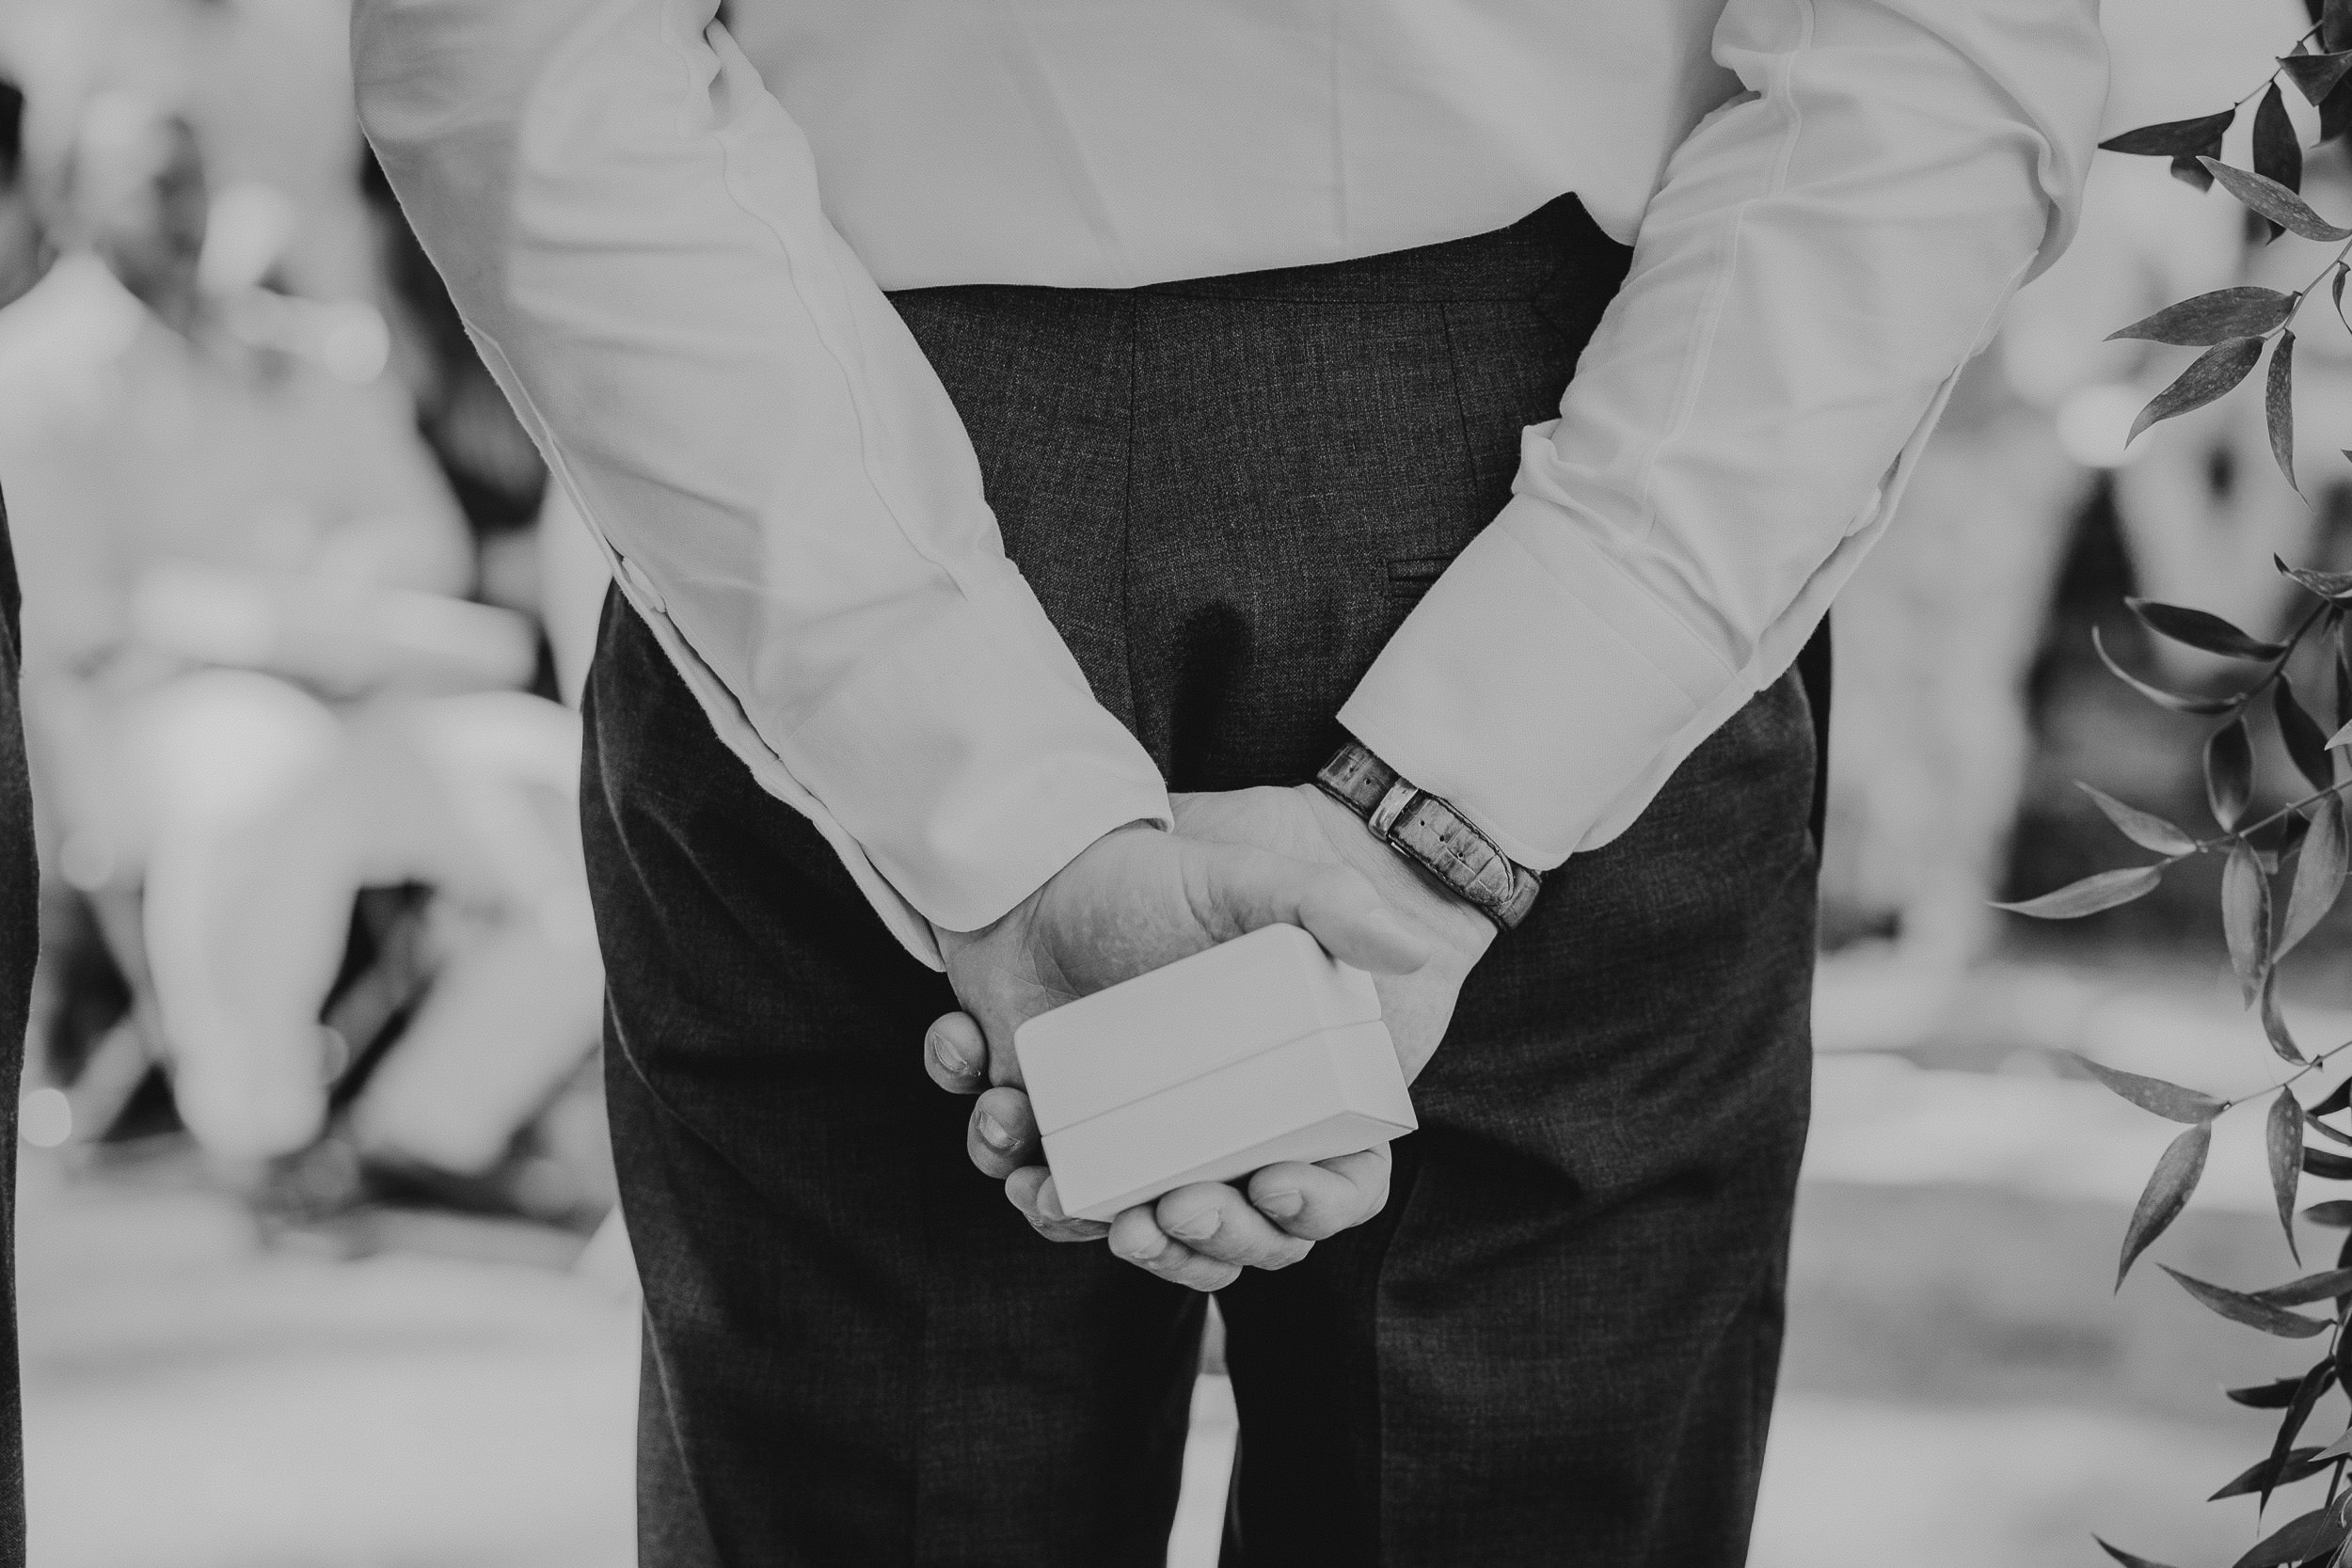 A groom's hands holding a wedding ring.